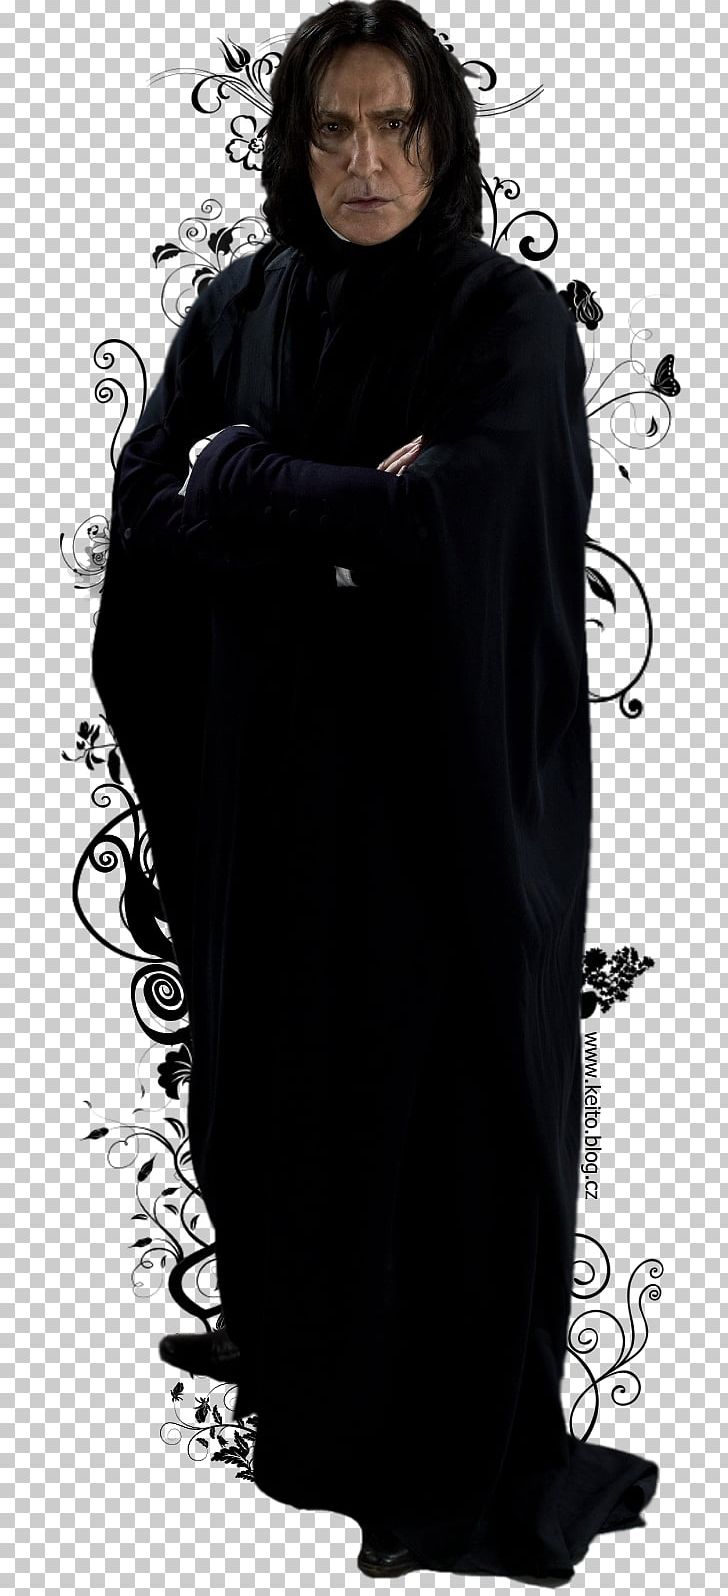 Professor Severus Snape Robe Harry Potter And The Deathly Hallows – Part 1 Cloak Black M PNG, Clipart, Abaya, Black, Black M, Cloak, Costume Free PNG Download